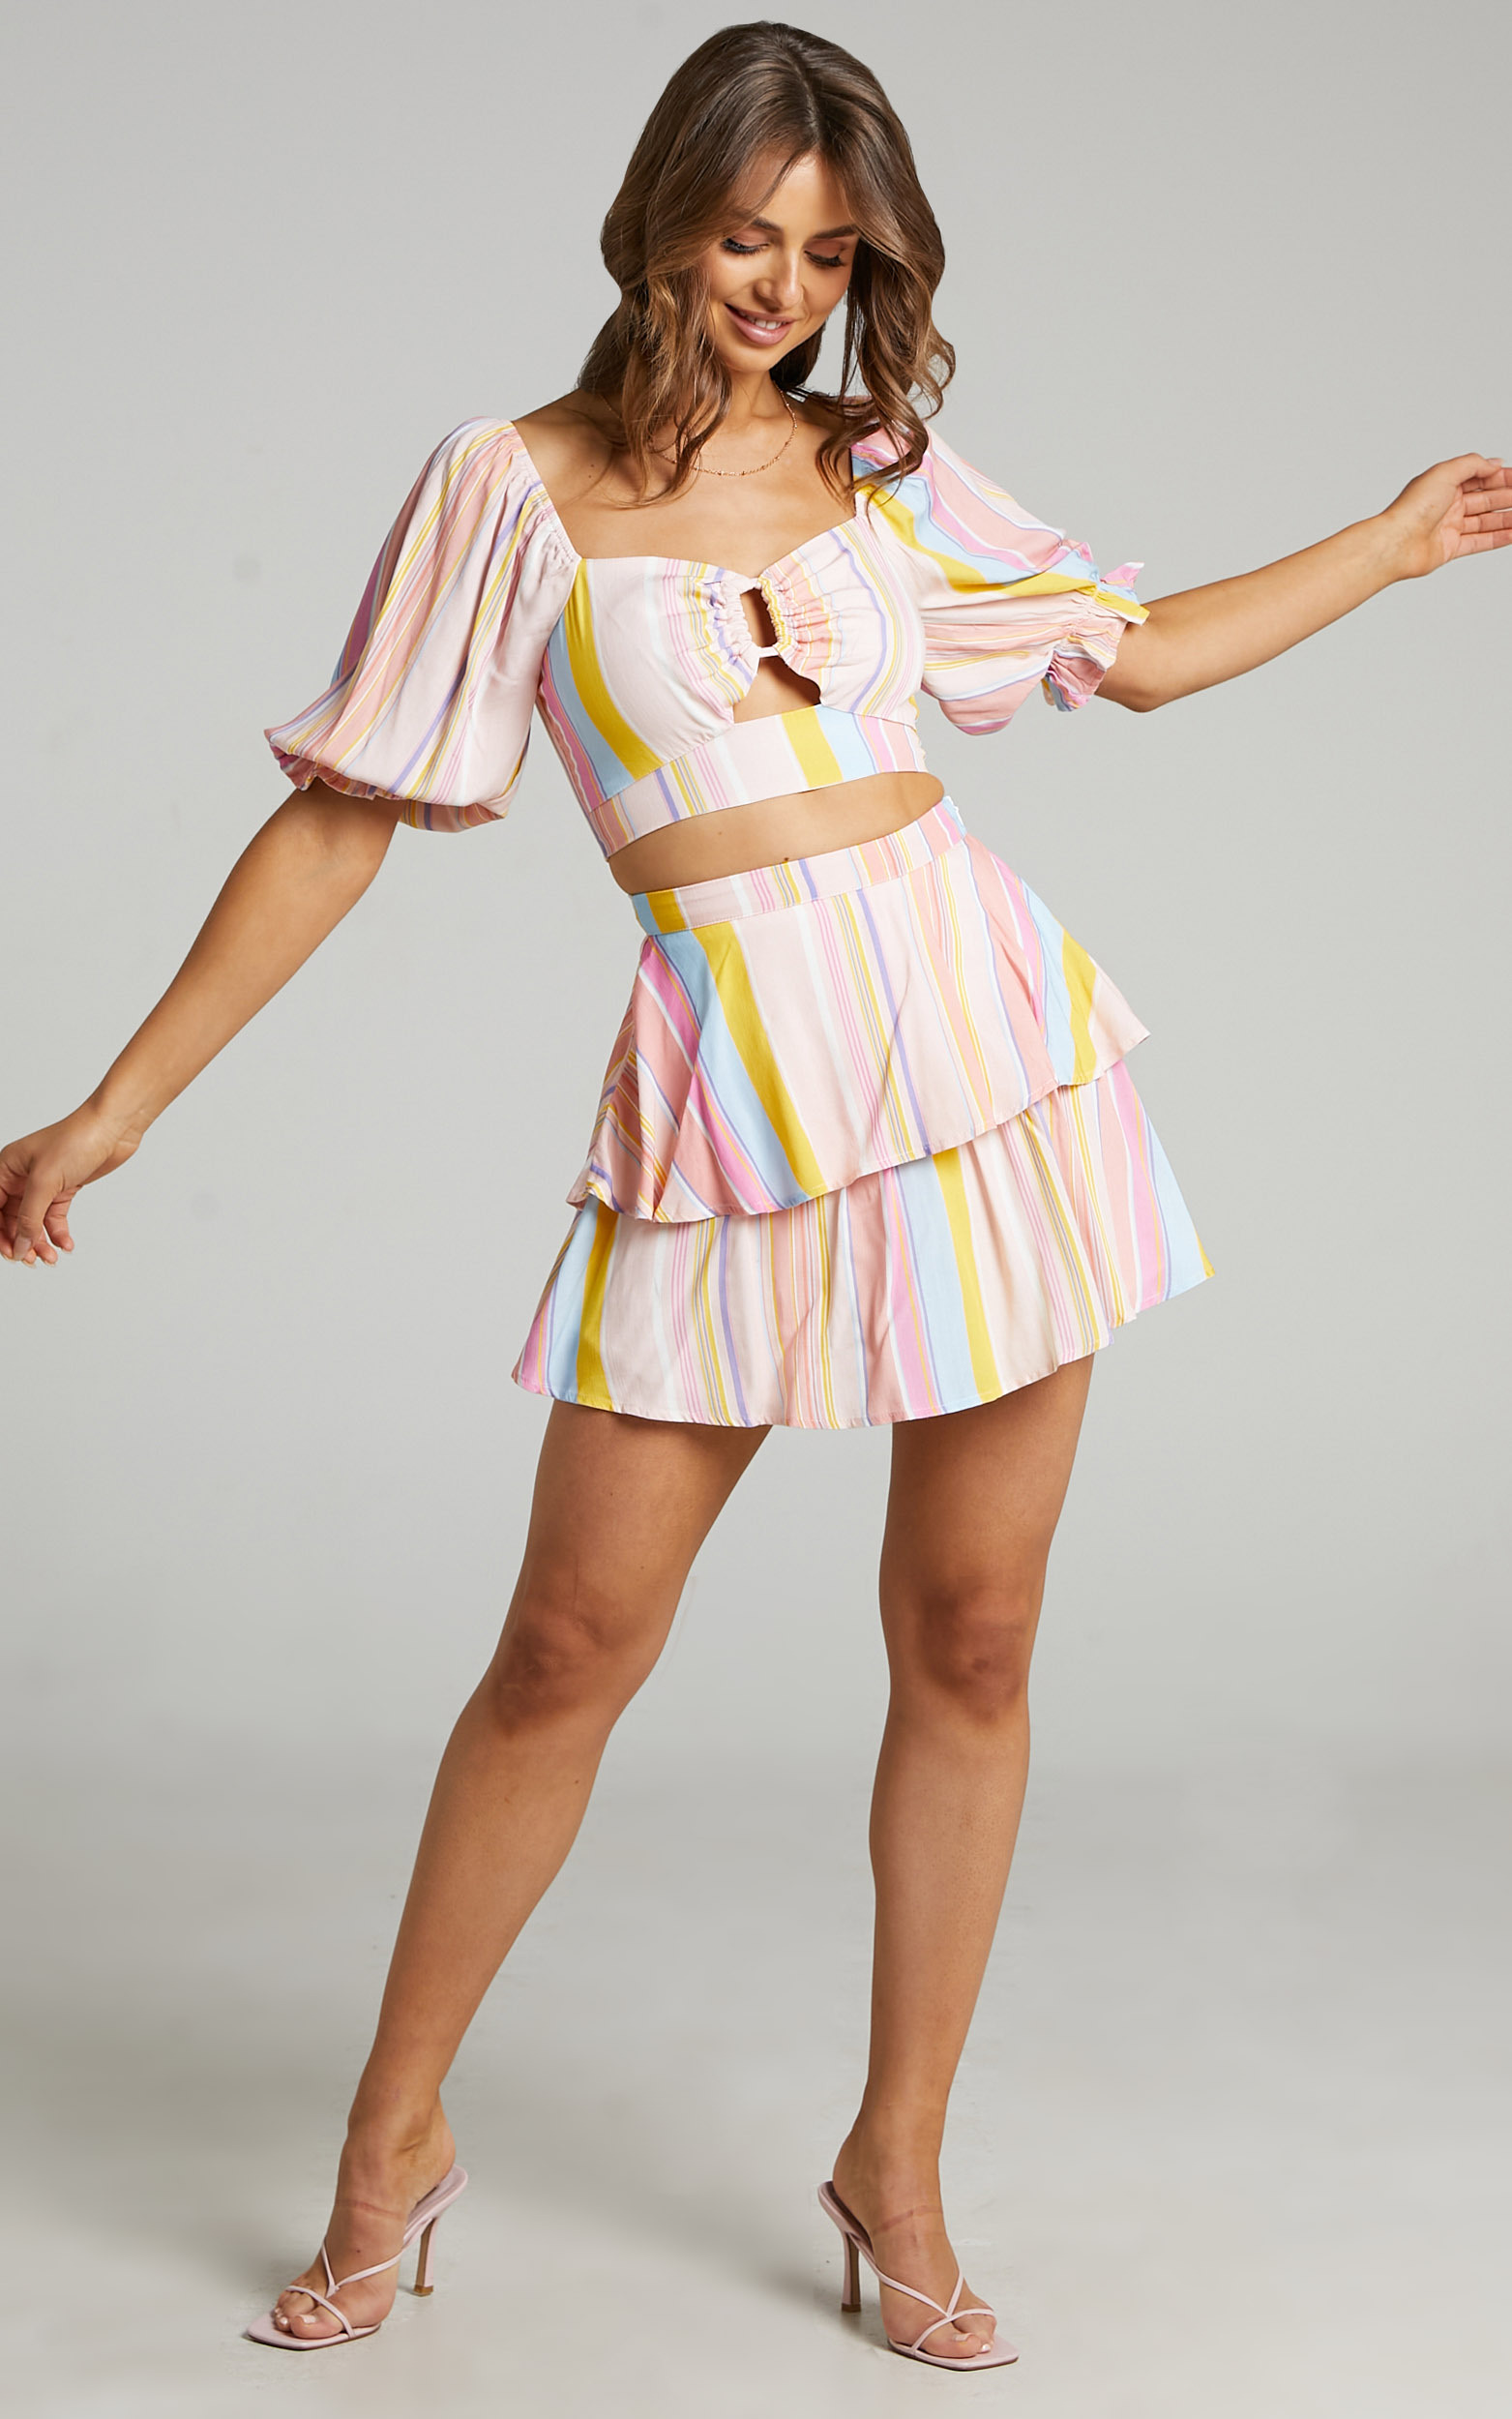 Ressy Tiered Frill Mini Skirt in Summer Multi Stripe - 06, PNK1, hi-res image number null